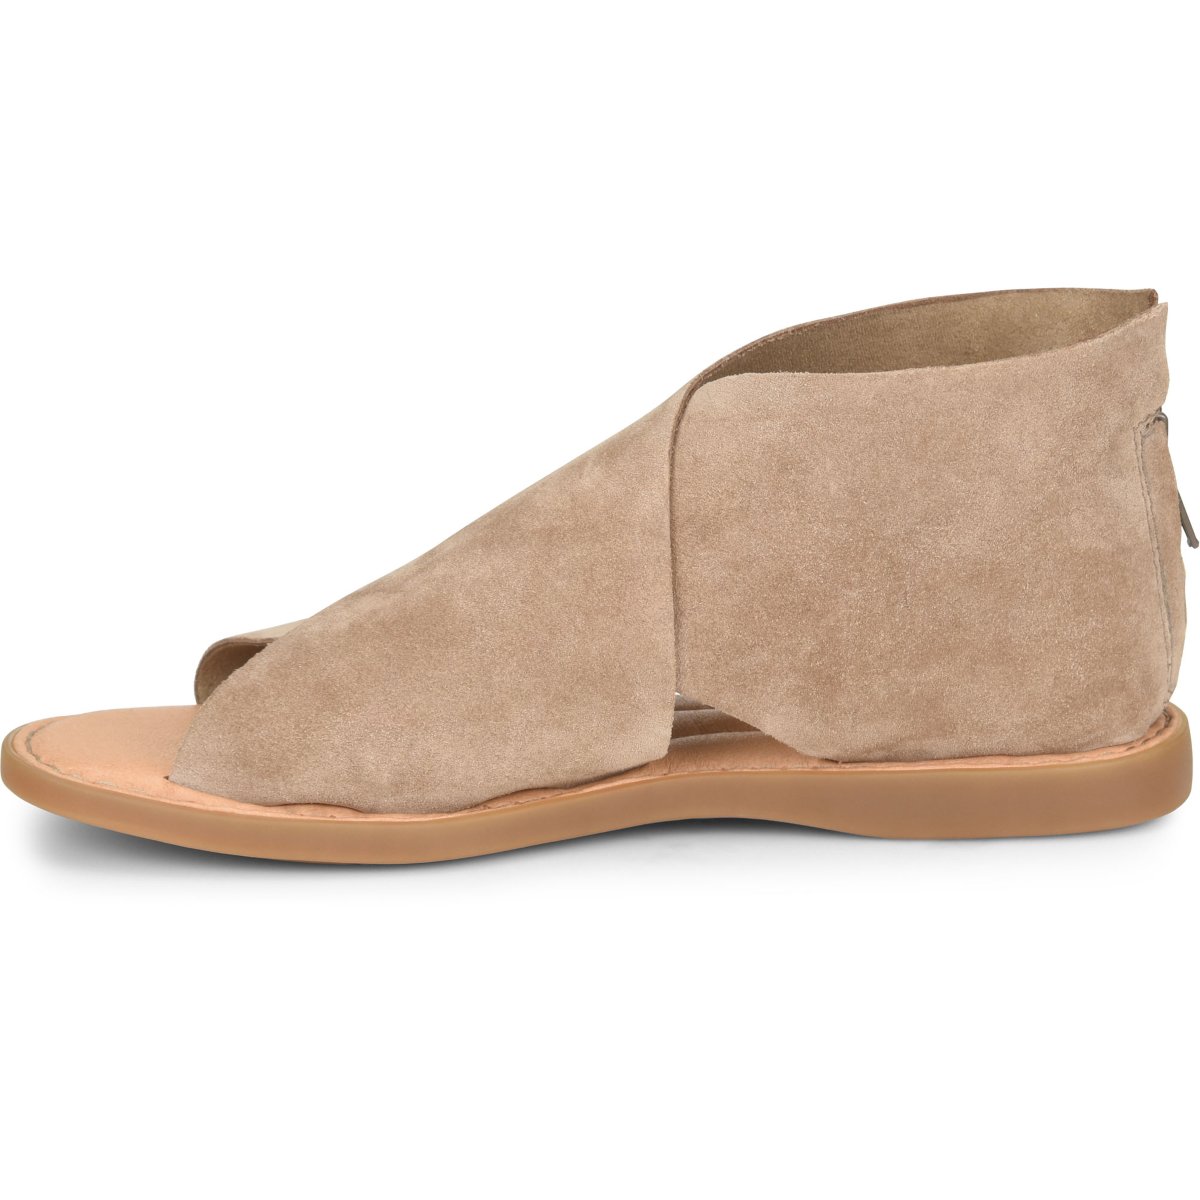 BORN Women's Iwa Sandal Taupe Suede (Beige) - F78017 TAUPE - TAUPE, 10